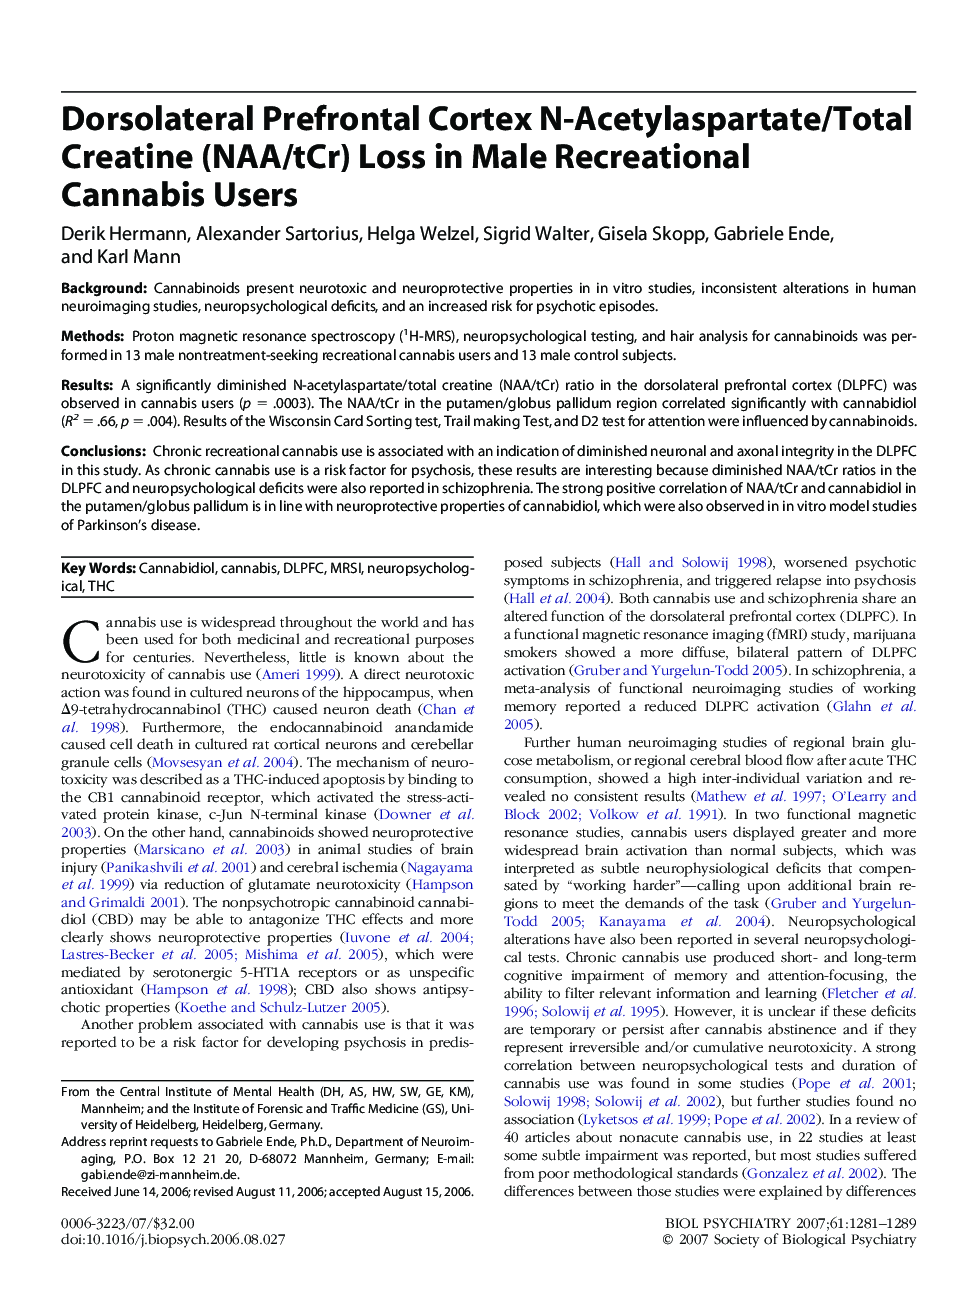 Dorsolateral Prefrontal Cortex N-Acetylaspartate/Total Creatine (NAA/tCr) Loss in Male Recreational Cannabis Users